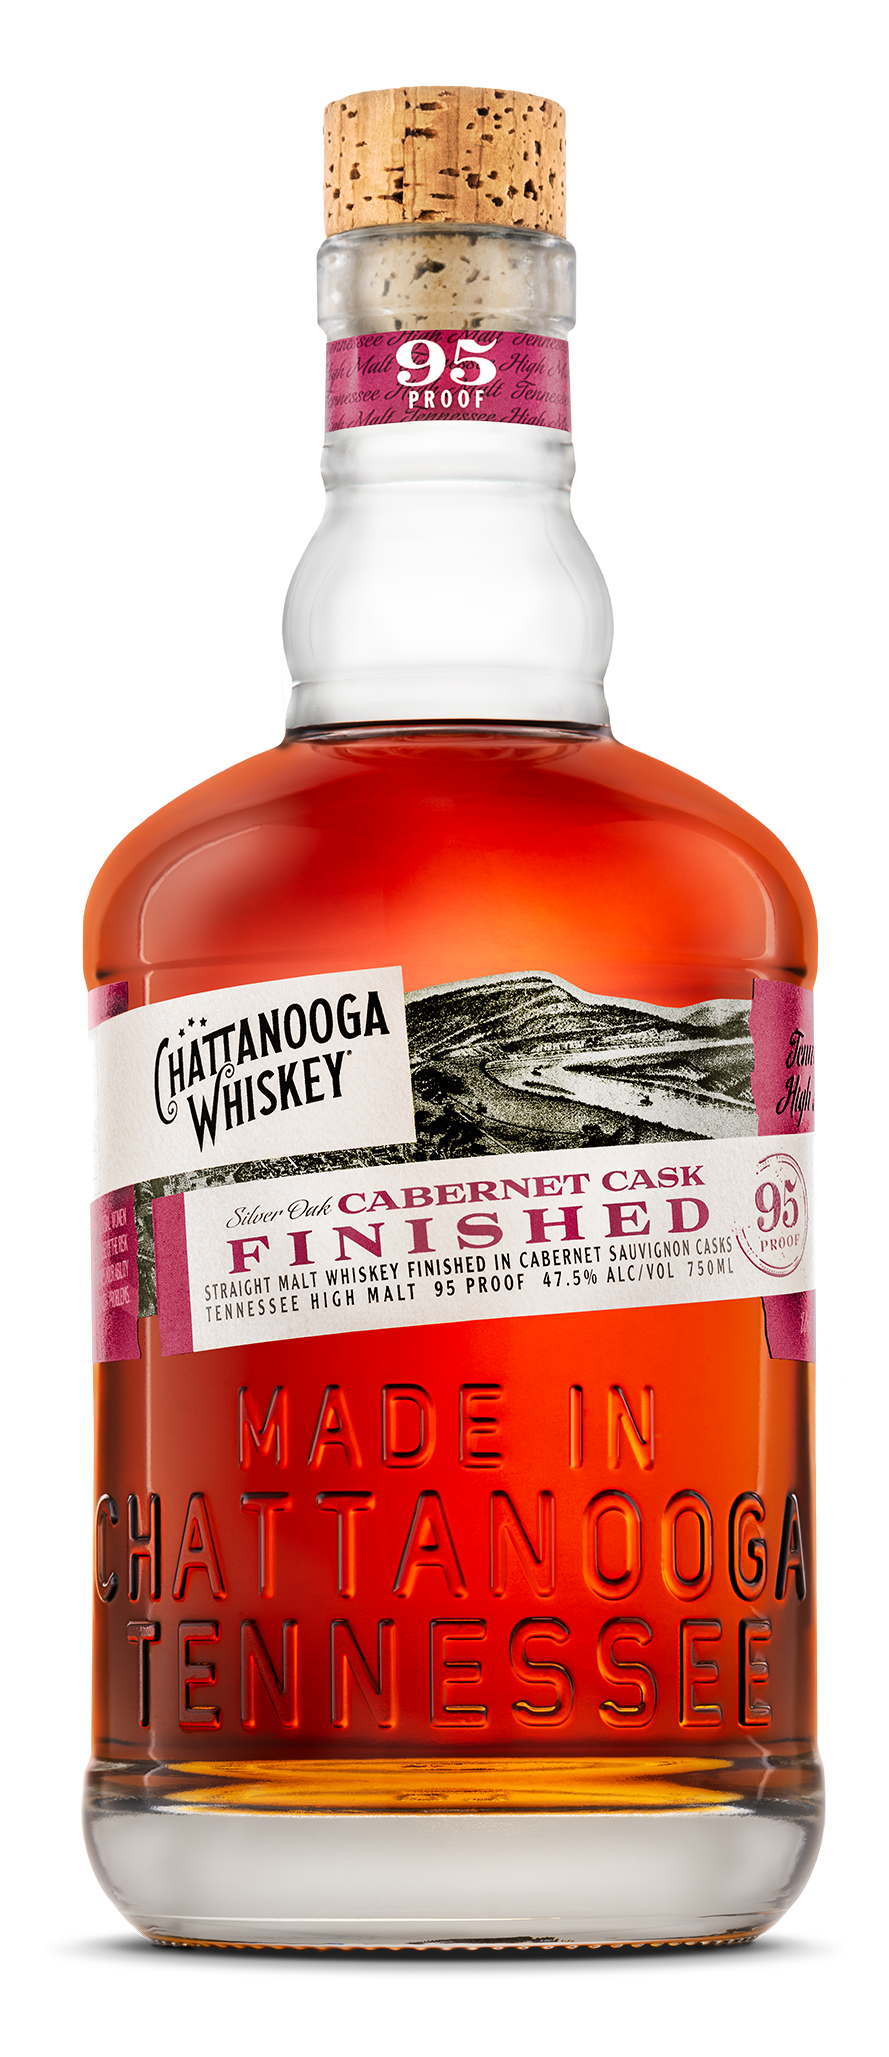 Chattanooga Whiskey Cabernet Cask